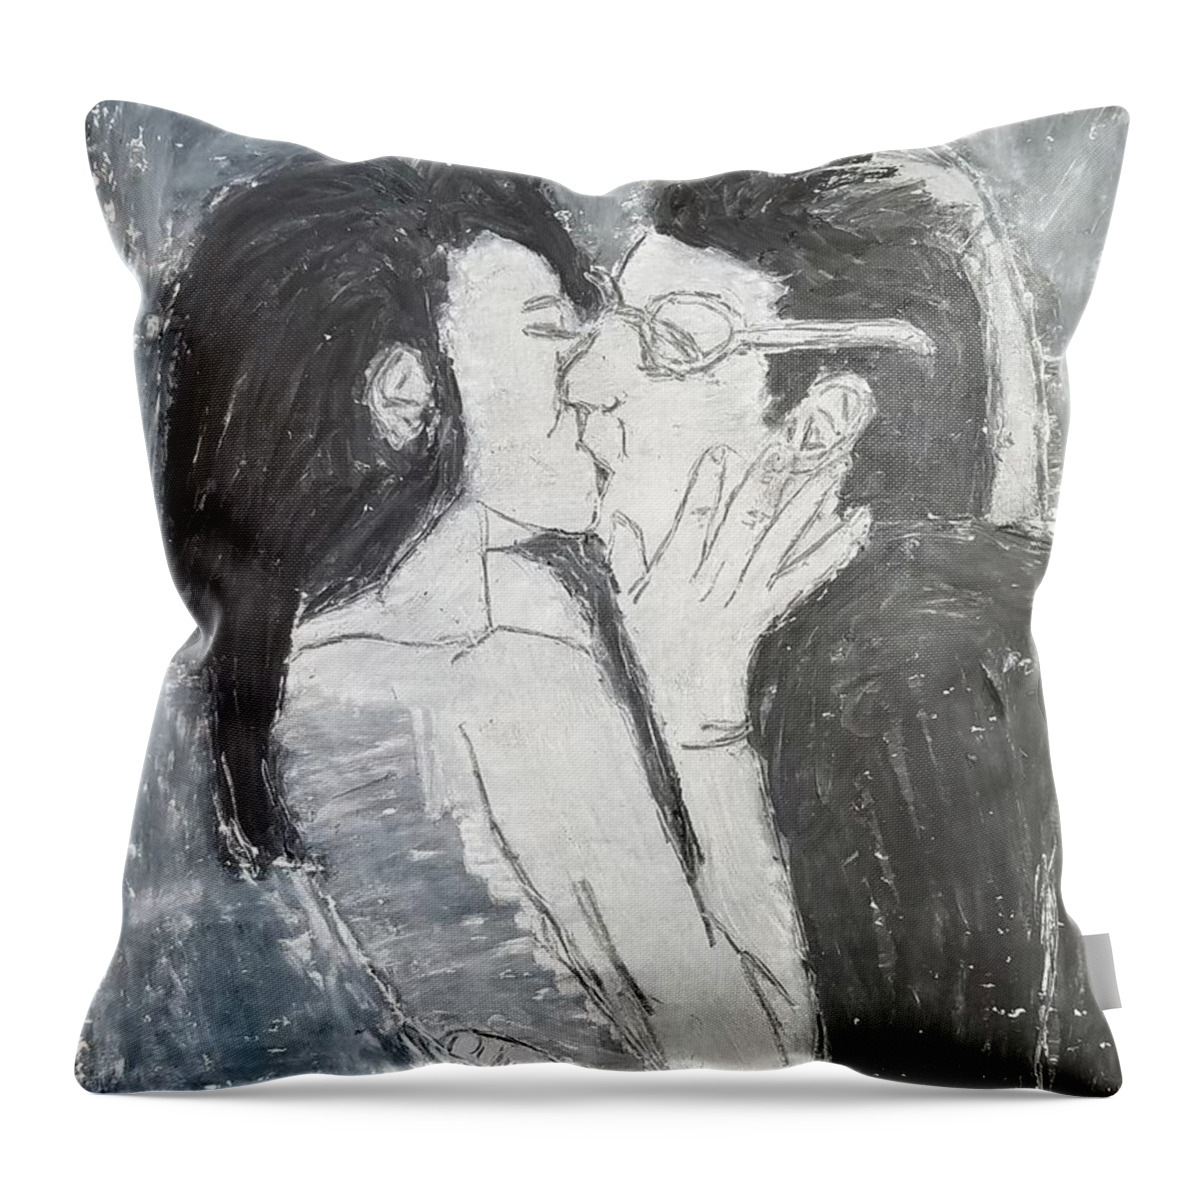  Throw Pillow featuring the painting Glasses Askew by Mark SanSouci